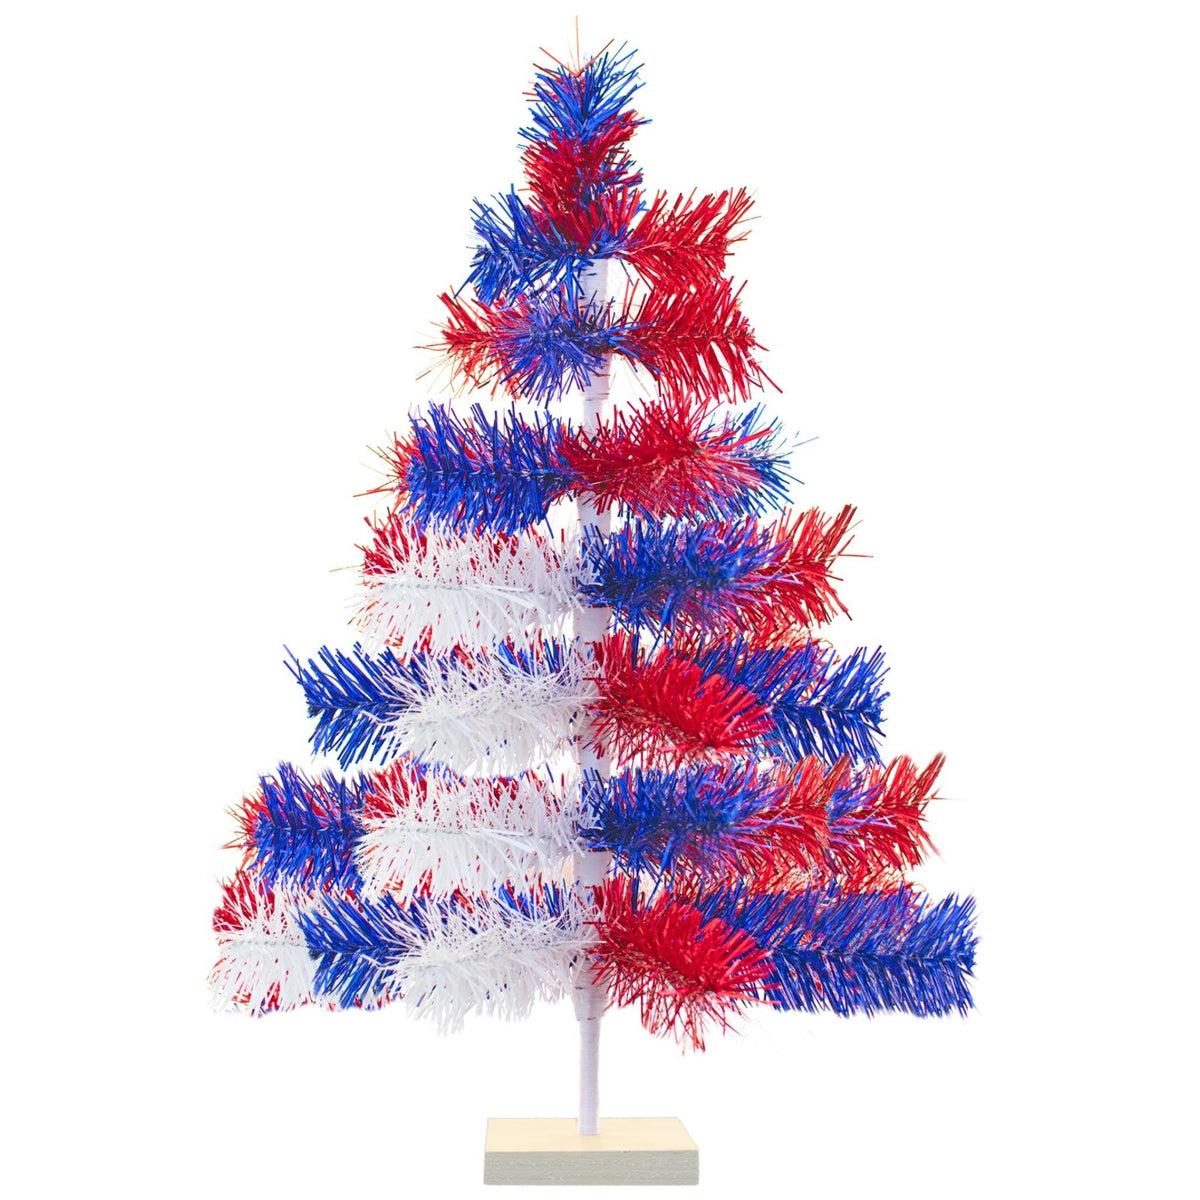 24in Tall Red White and Blue Mixed Tinsel Christmas Tree on sale at leedisplay.com.